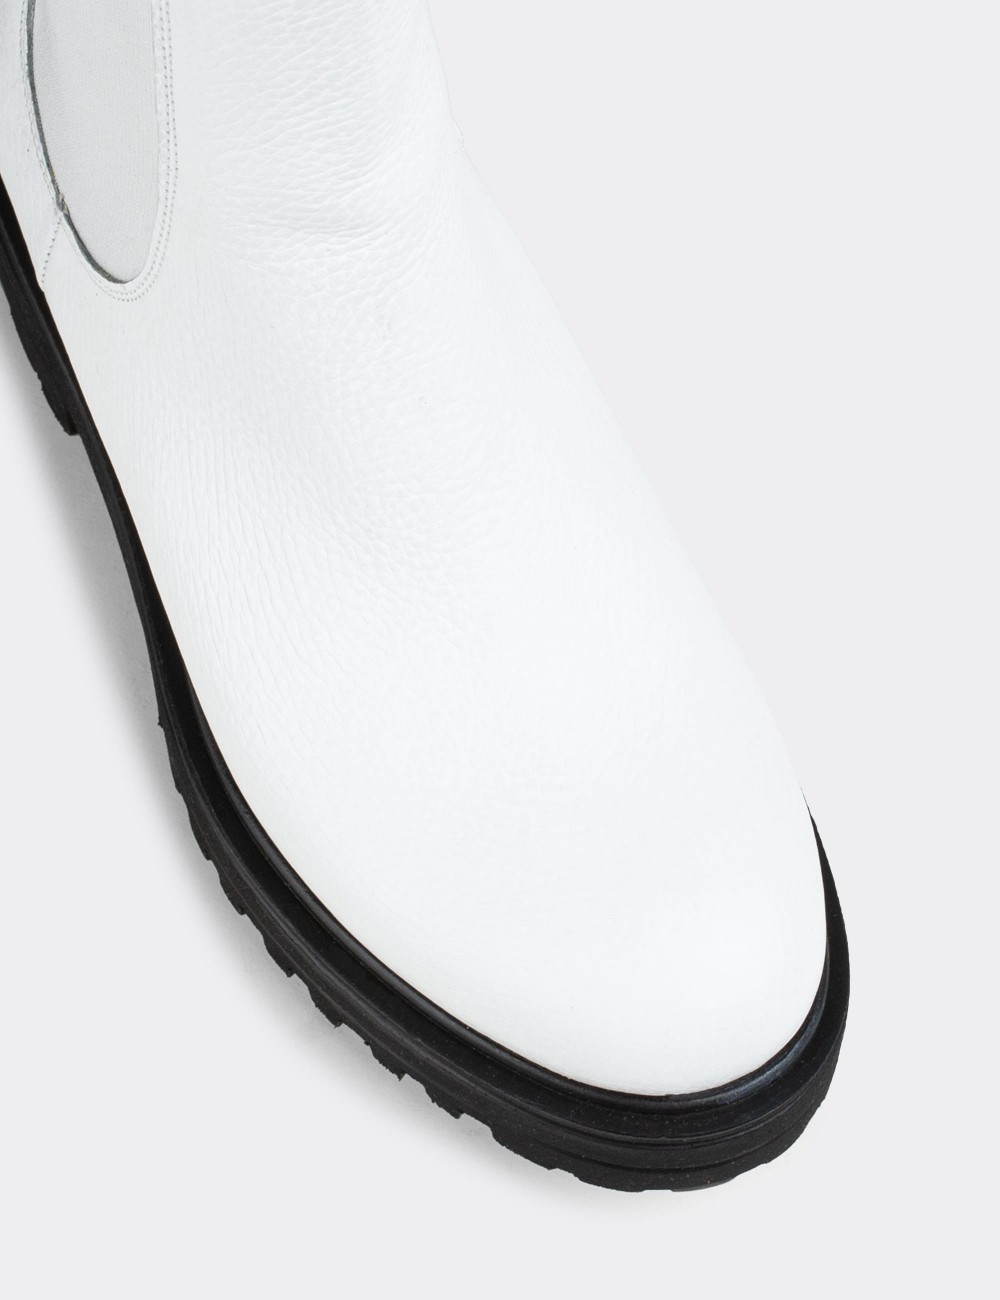 White  Leather Chelsea Boots - E2020ZBYZC02